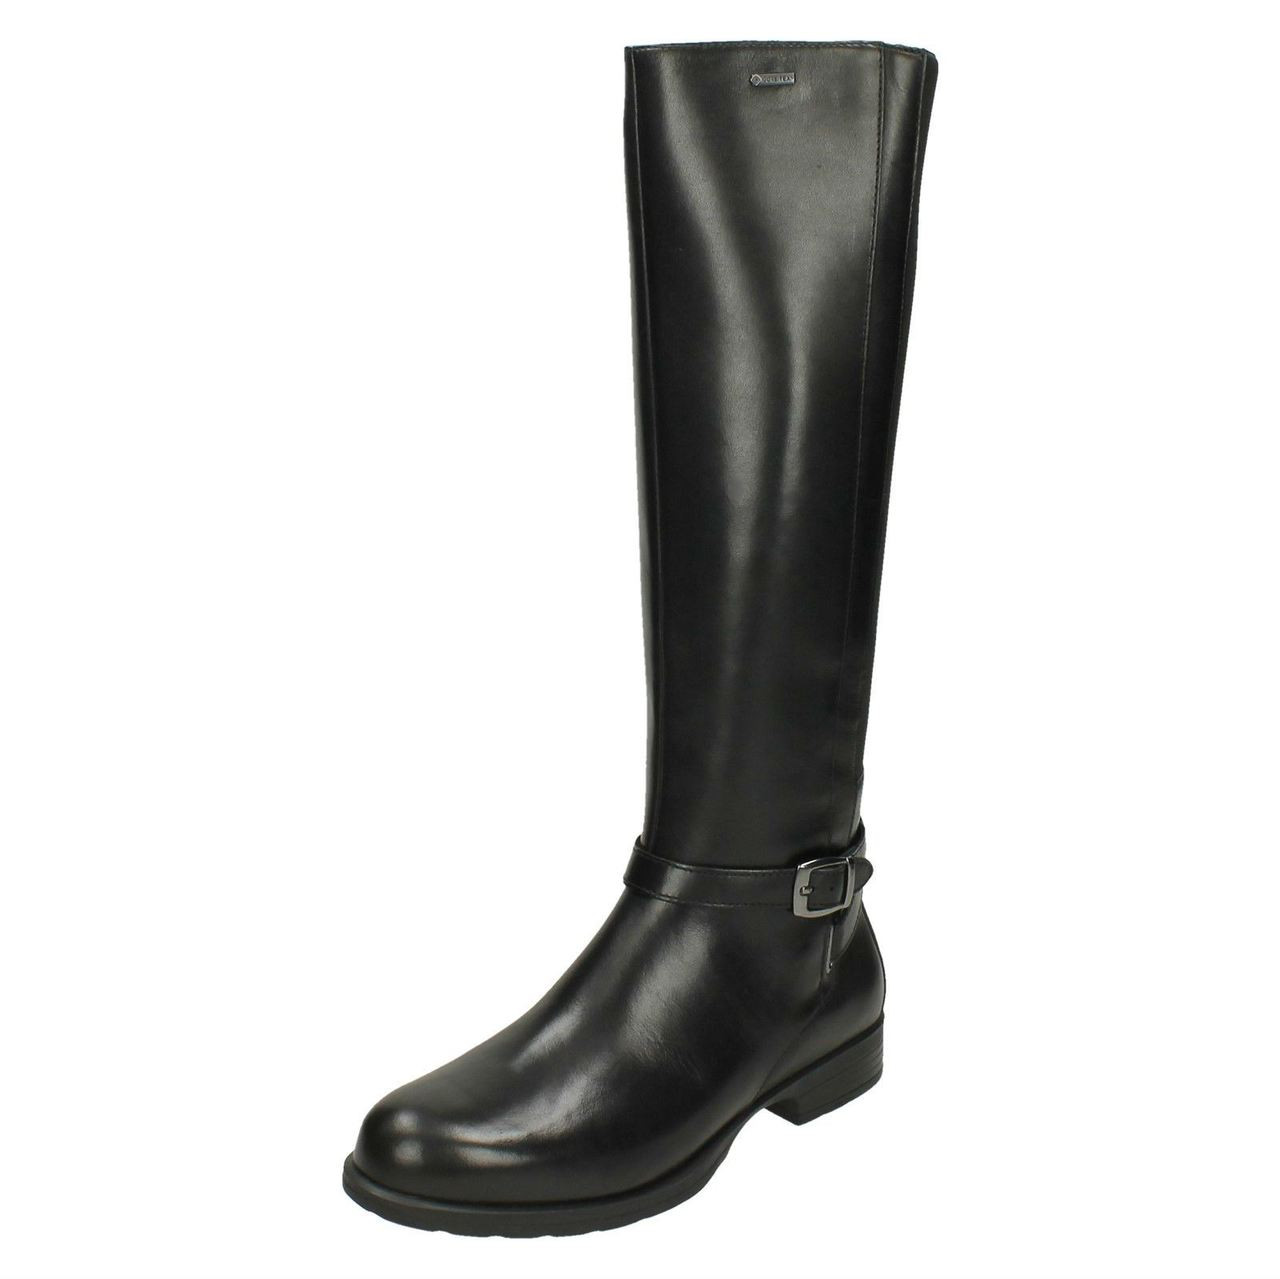 clarks boots knee high